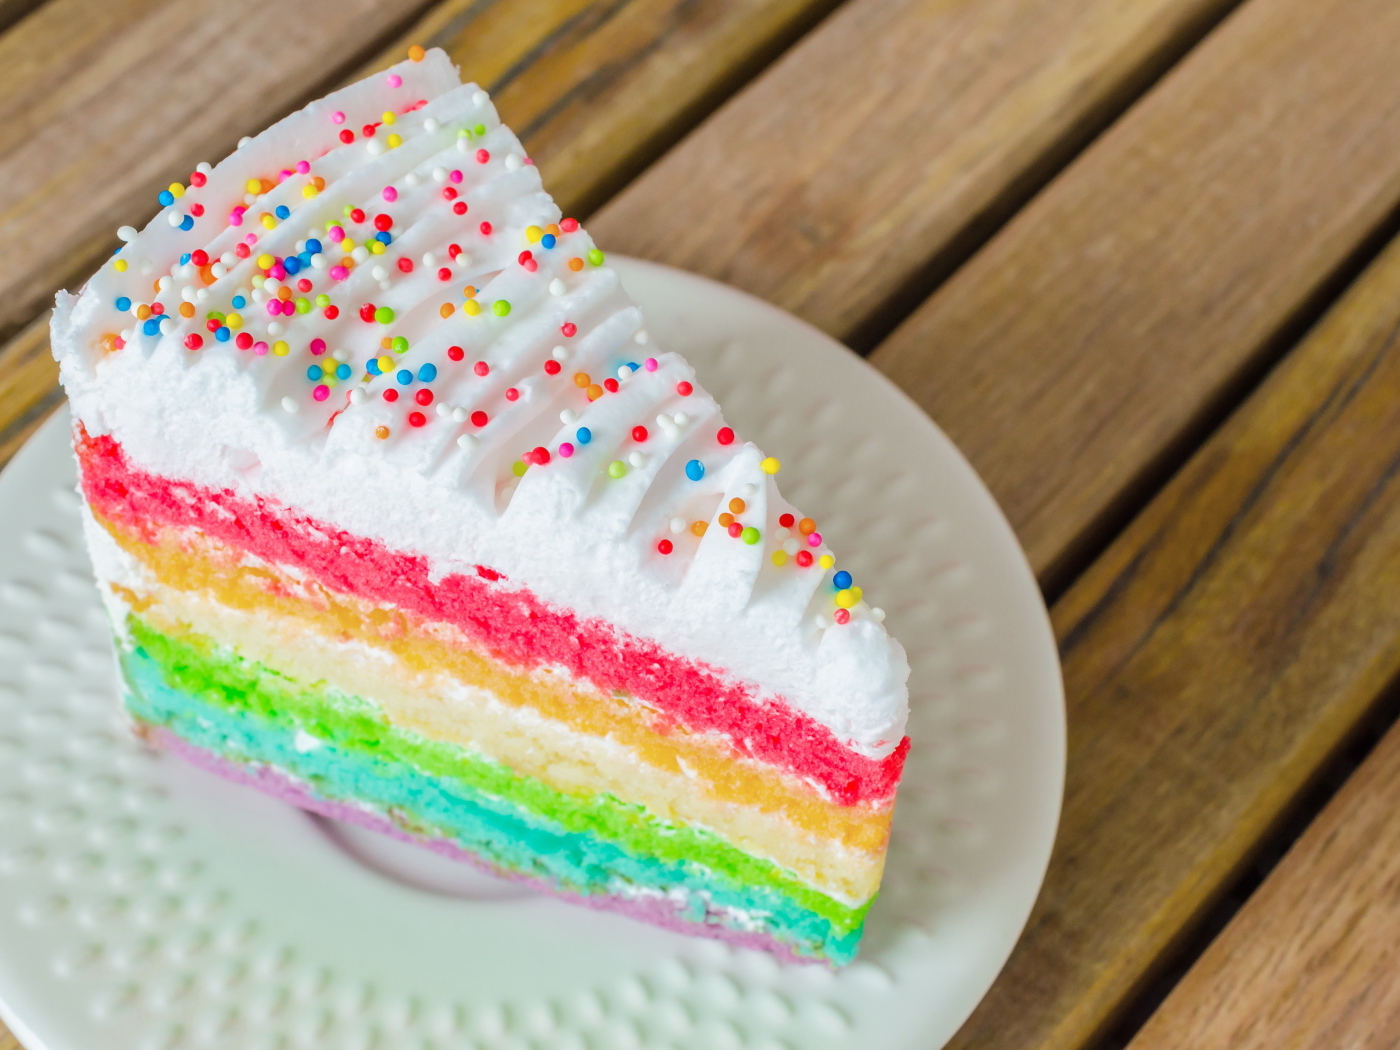 A piece of a multi-colored cake on a white plate